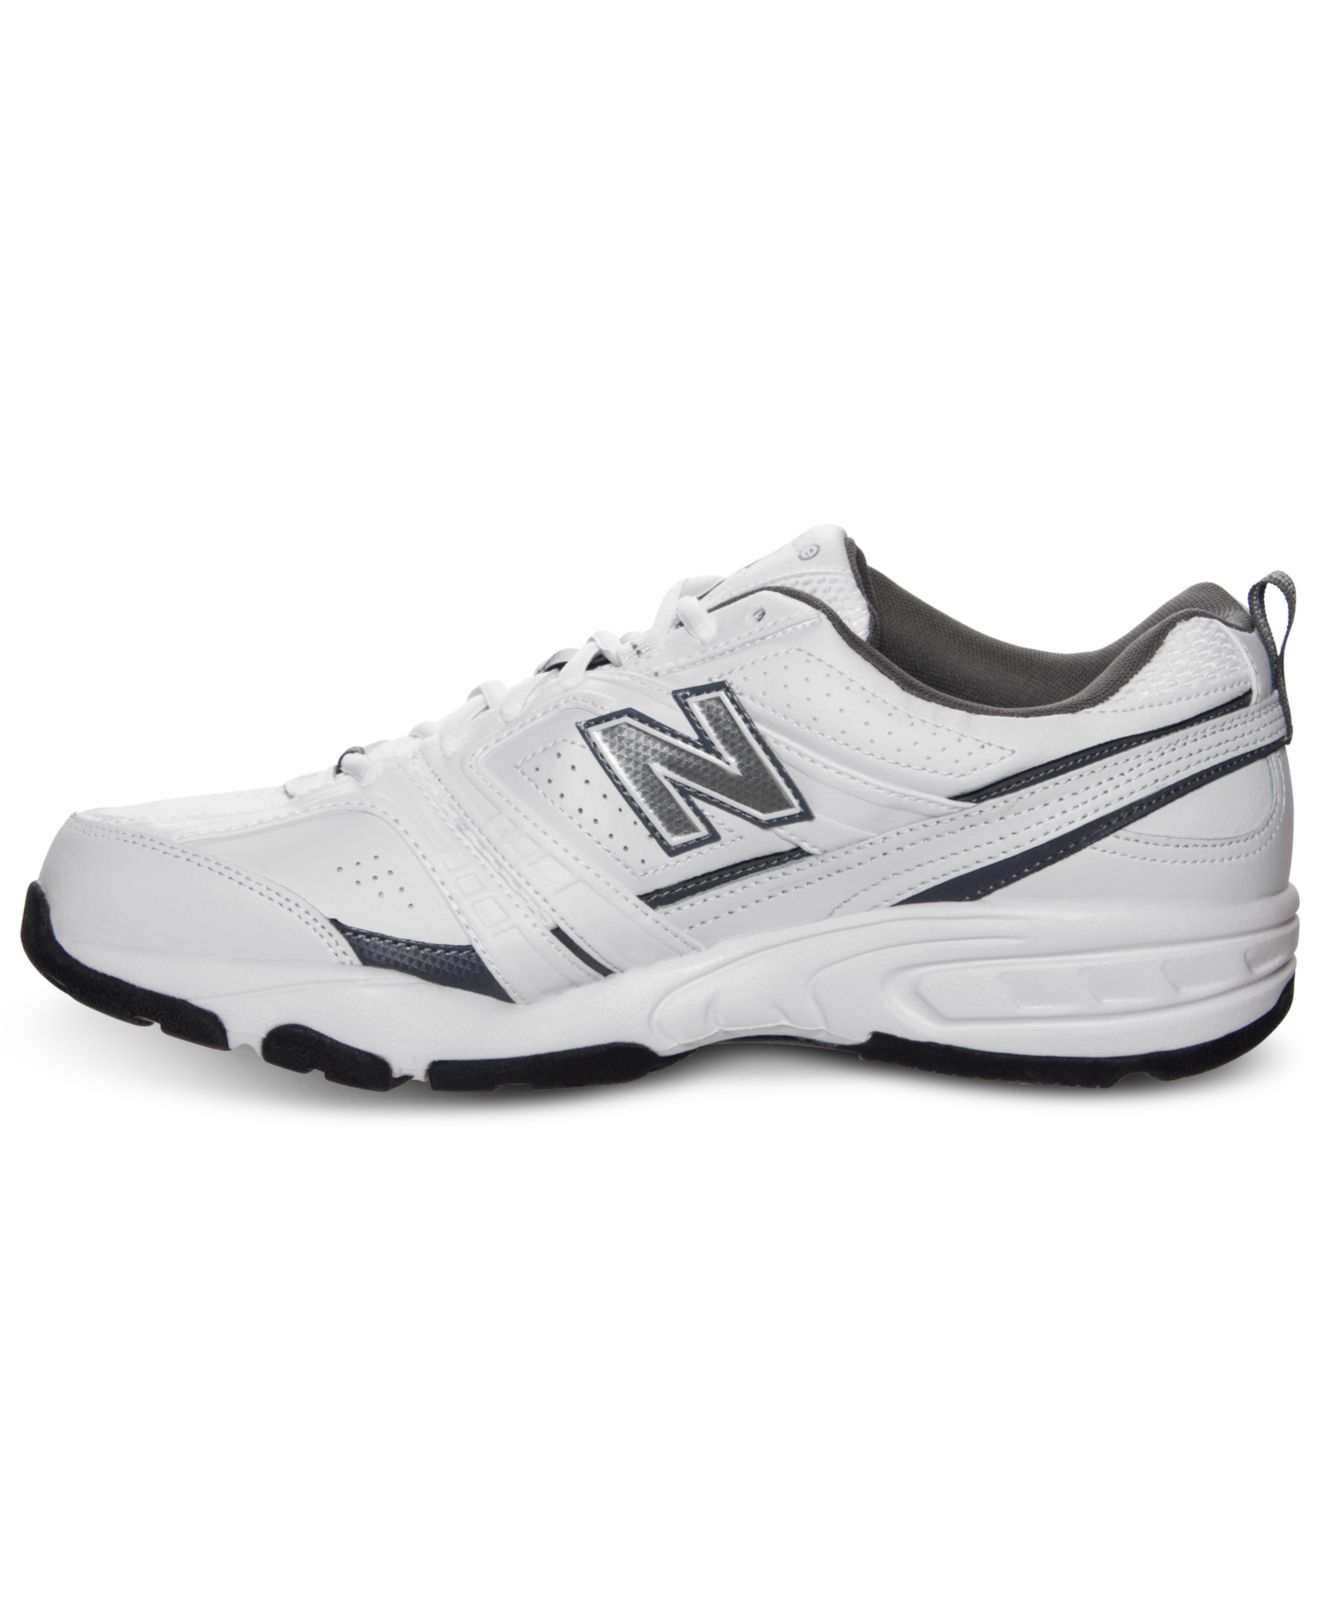 New balance Men'S Mx 409 Wide Cross Training Sneakers From Finish Line ...